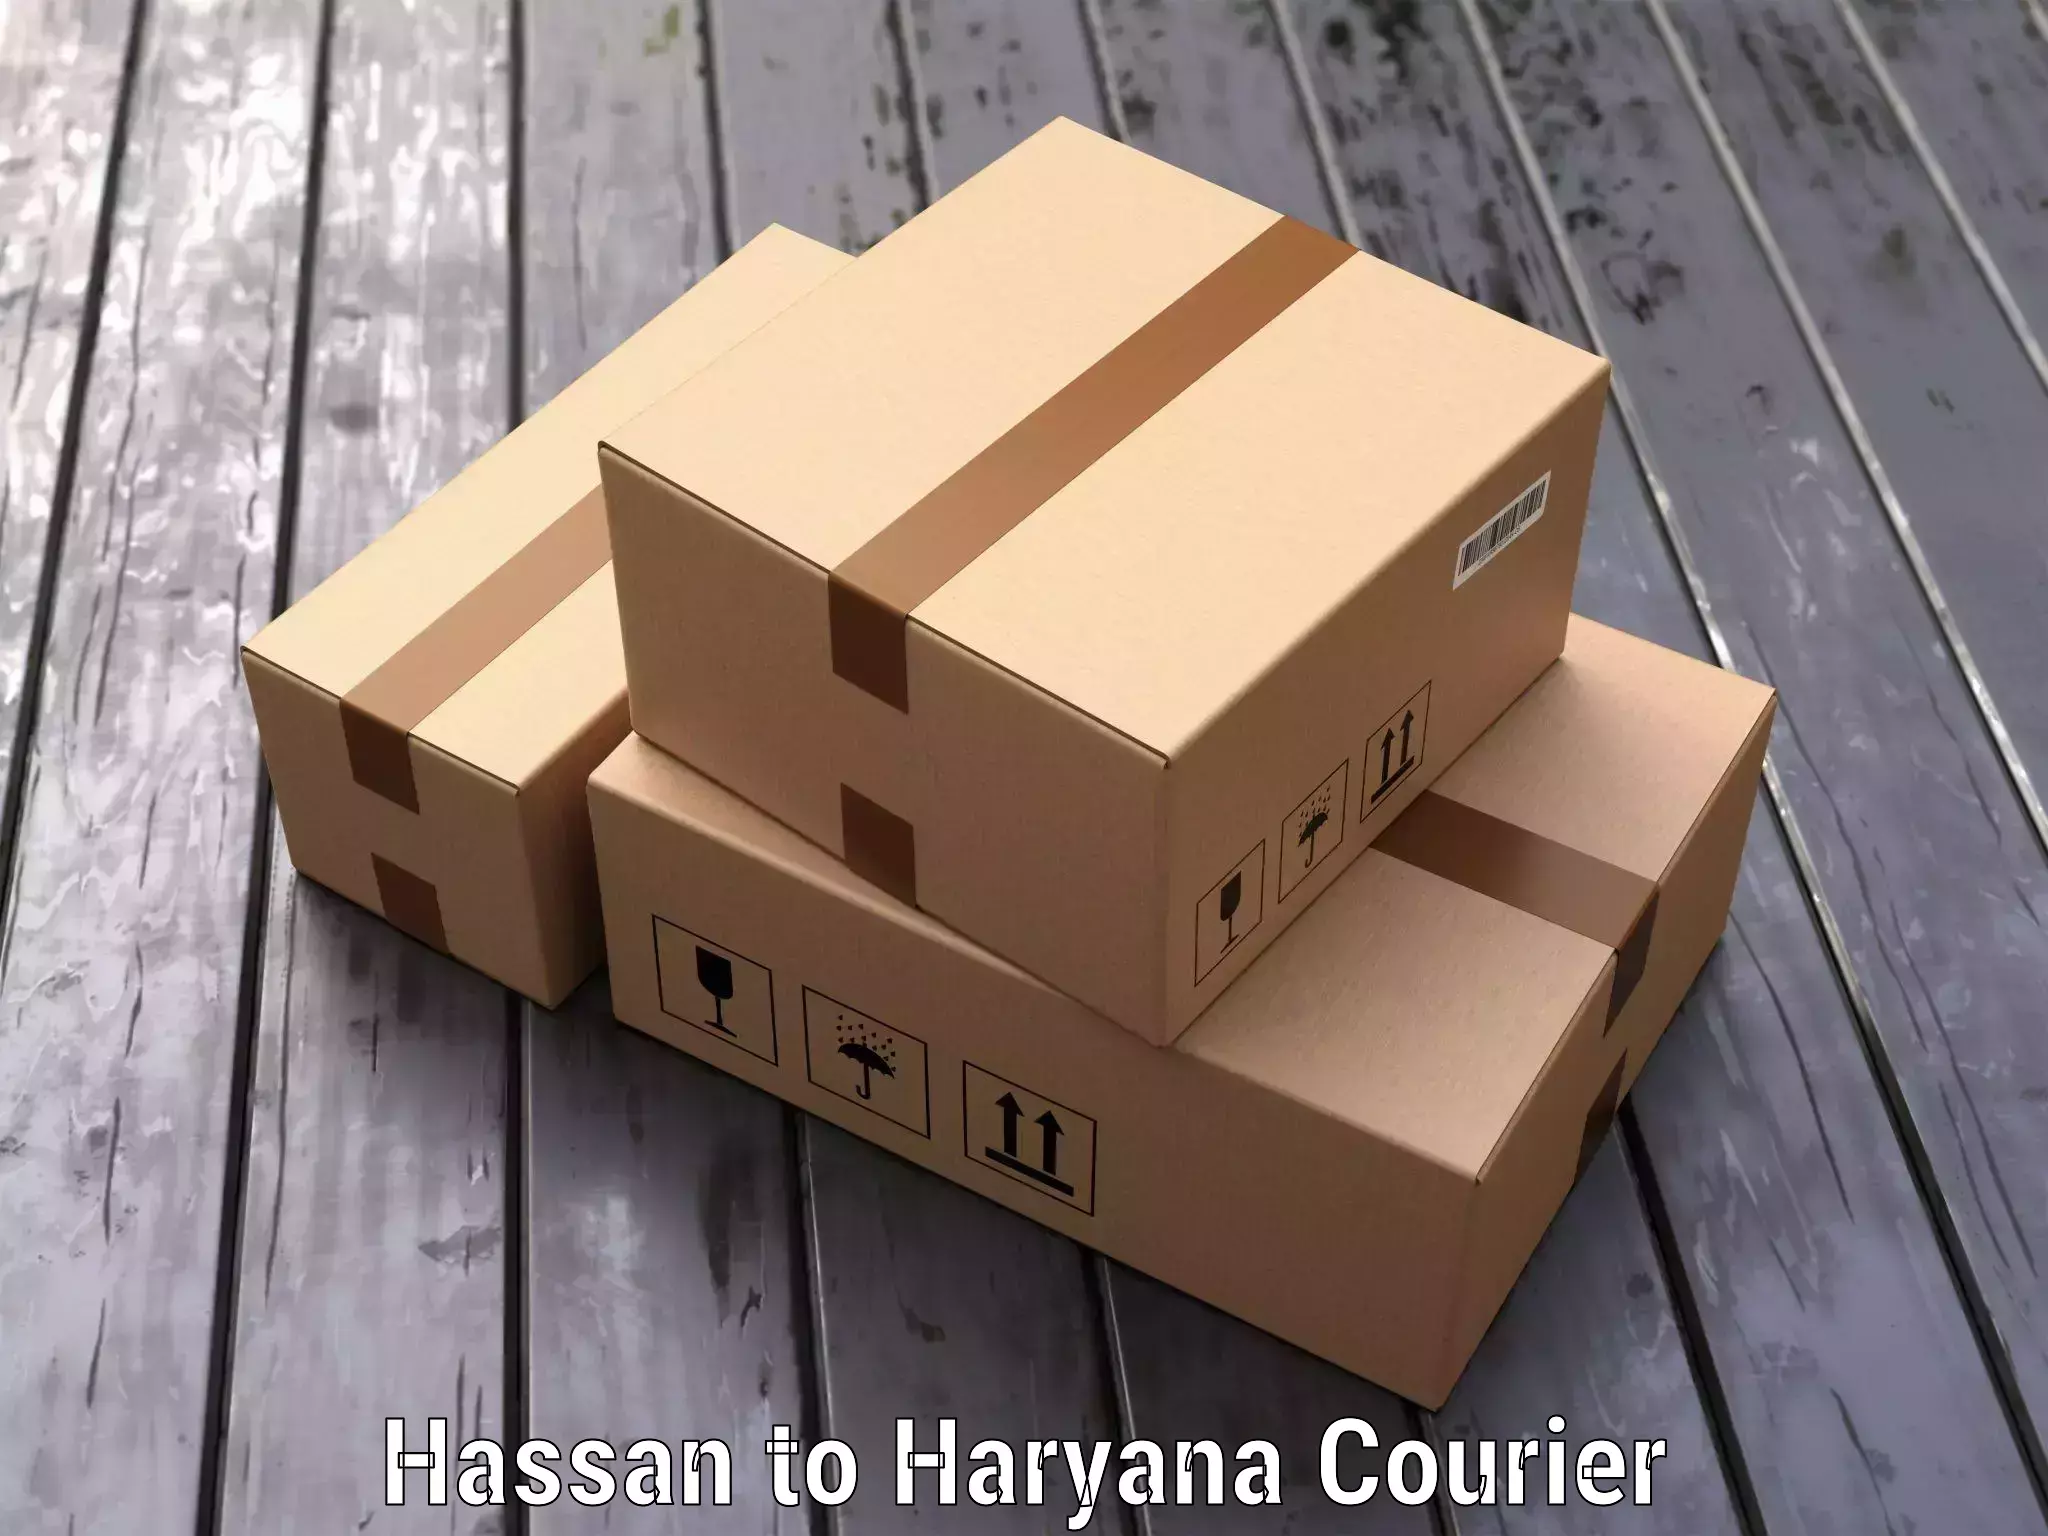 Luggage transfer service Hassan to Haryana